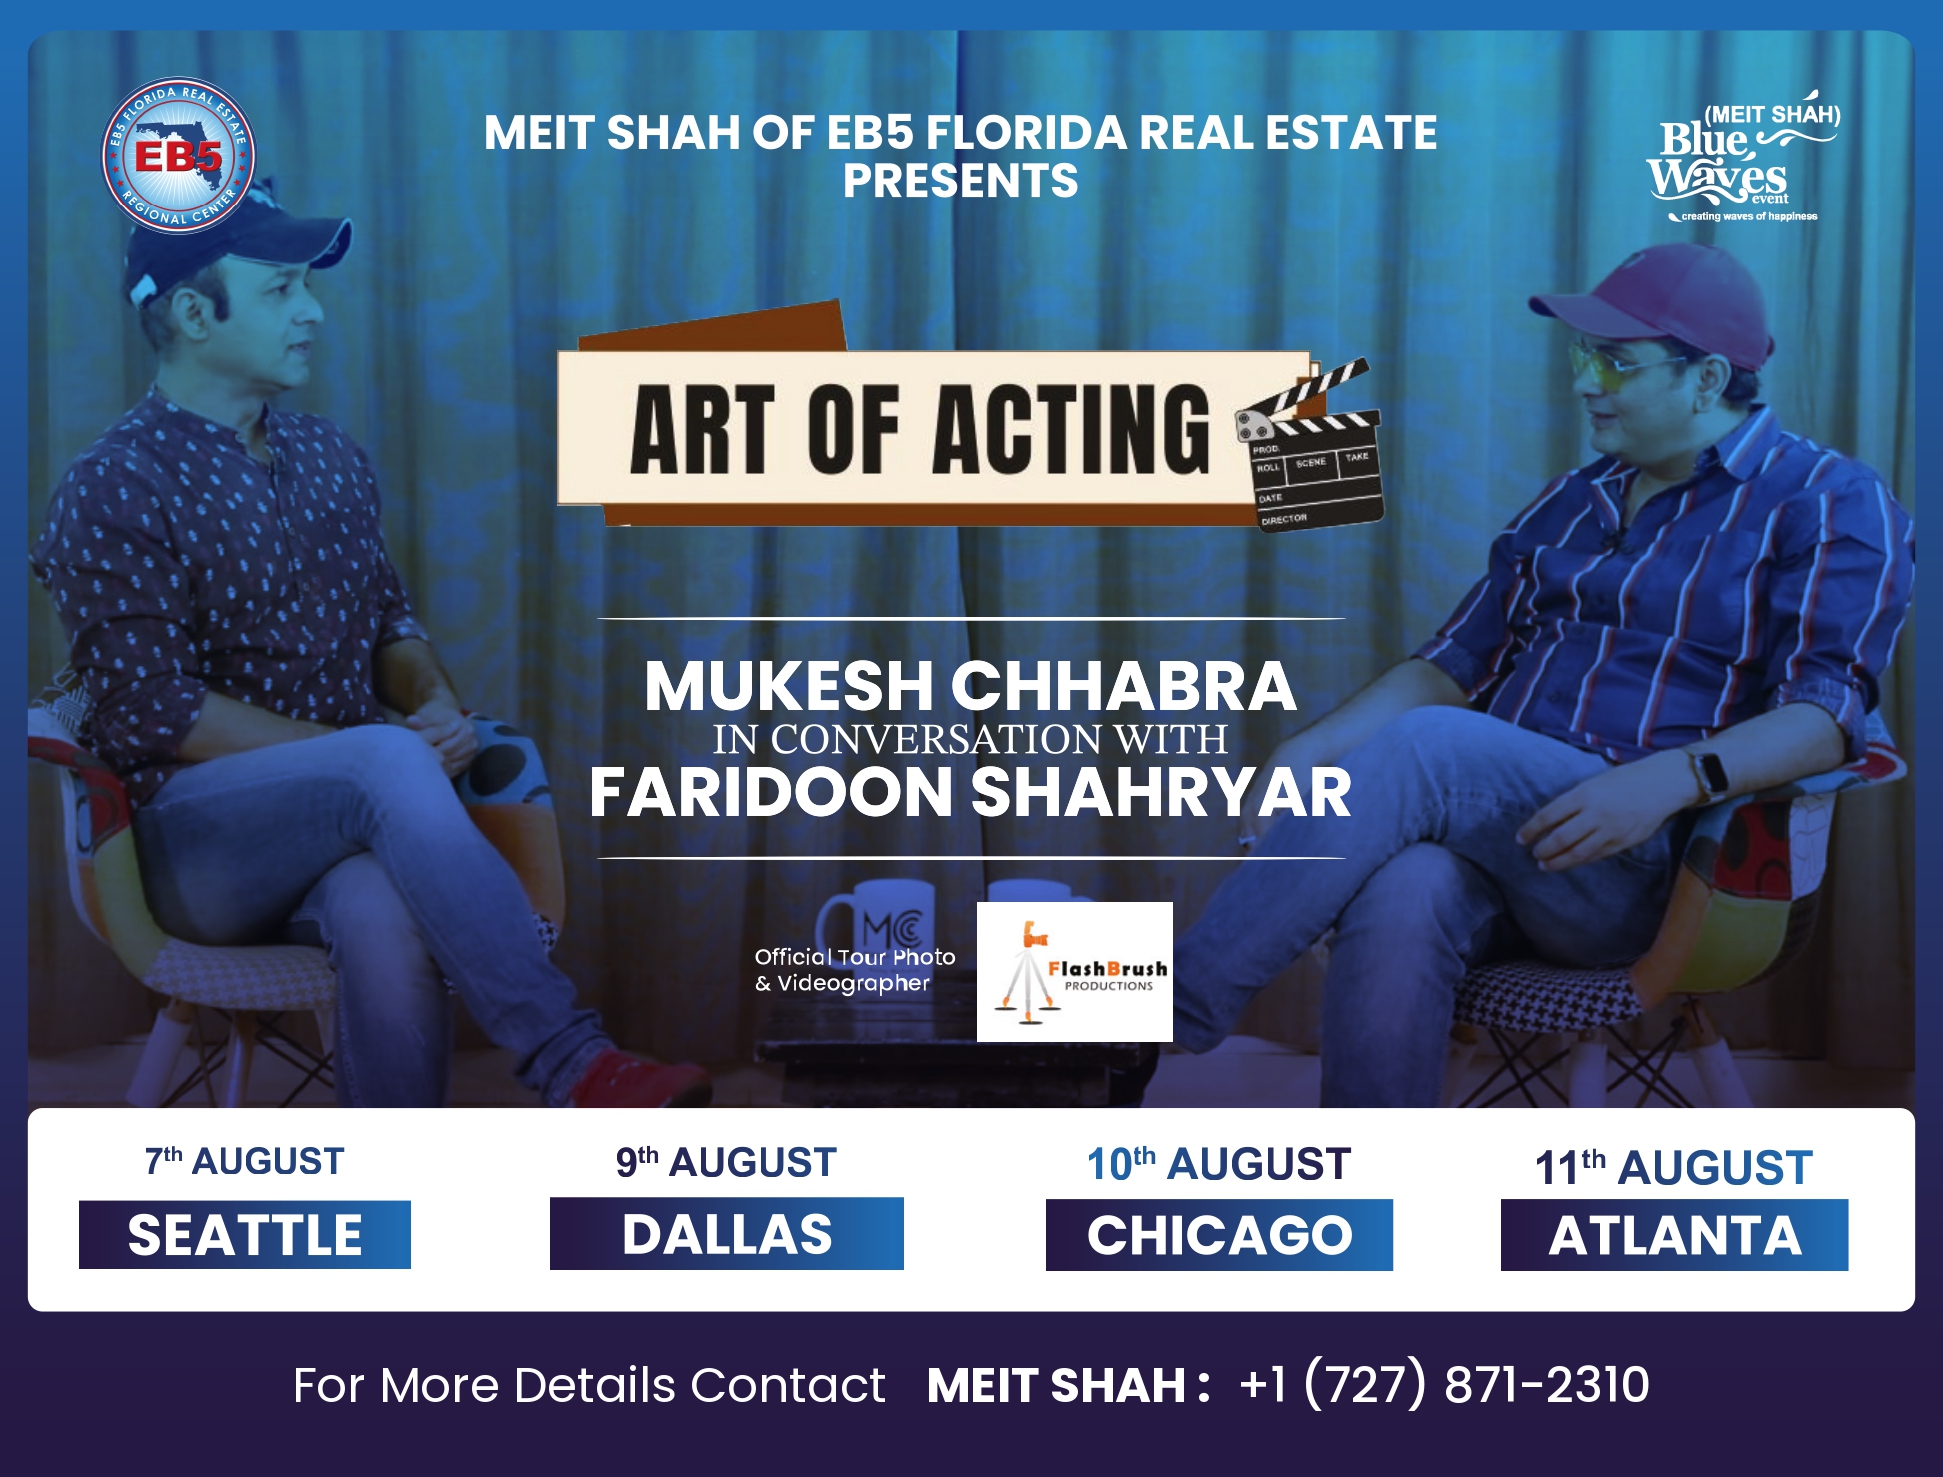 Mukesh Chhabra to converse with popular journalist Faridoon Shahryar, undertake a 4-city ‘Art Of Acting’ tour in the USA